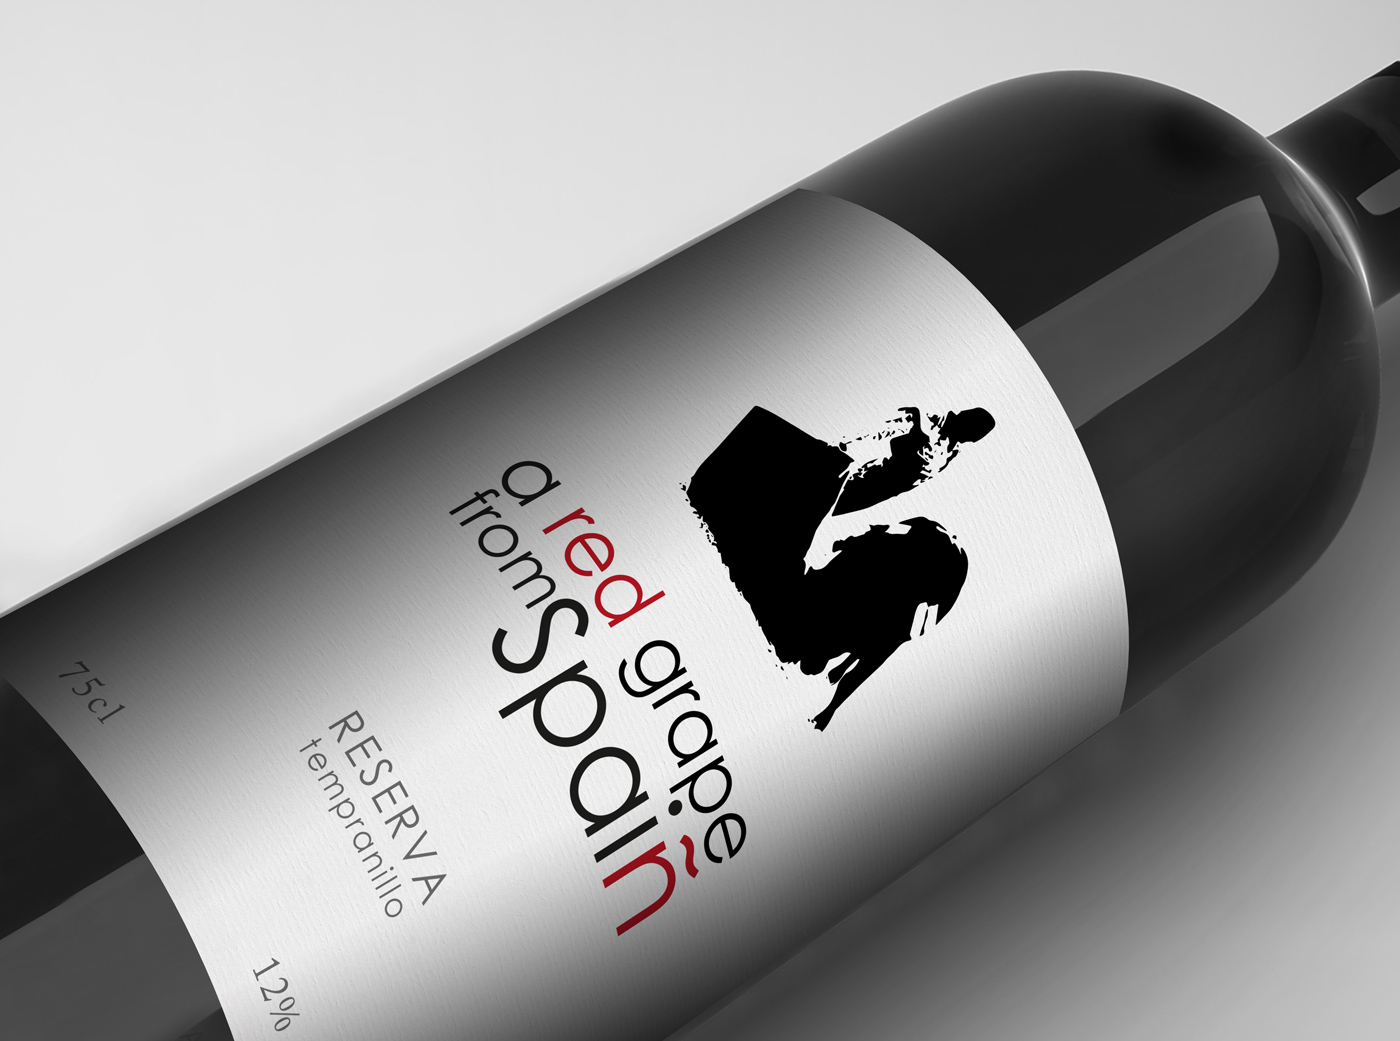 Portfolio of graphic and creative design works wine labels and packaging for wine A RED GRAPE FROM SPAIN